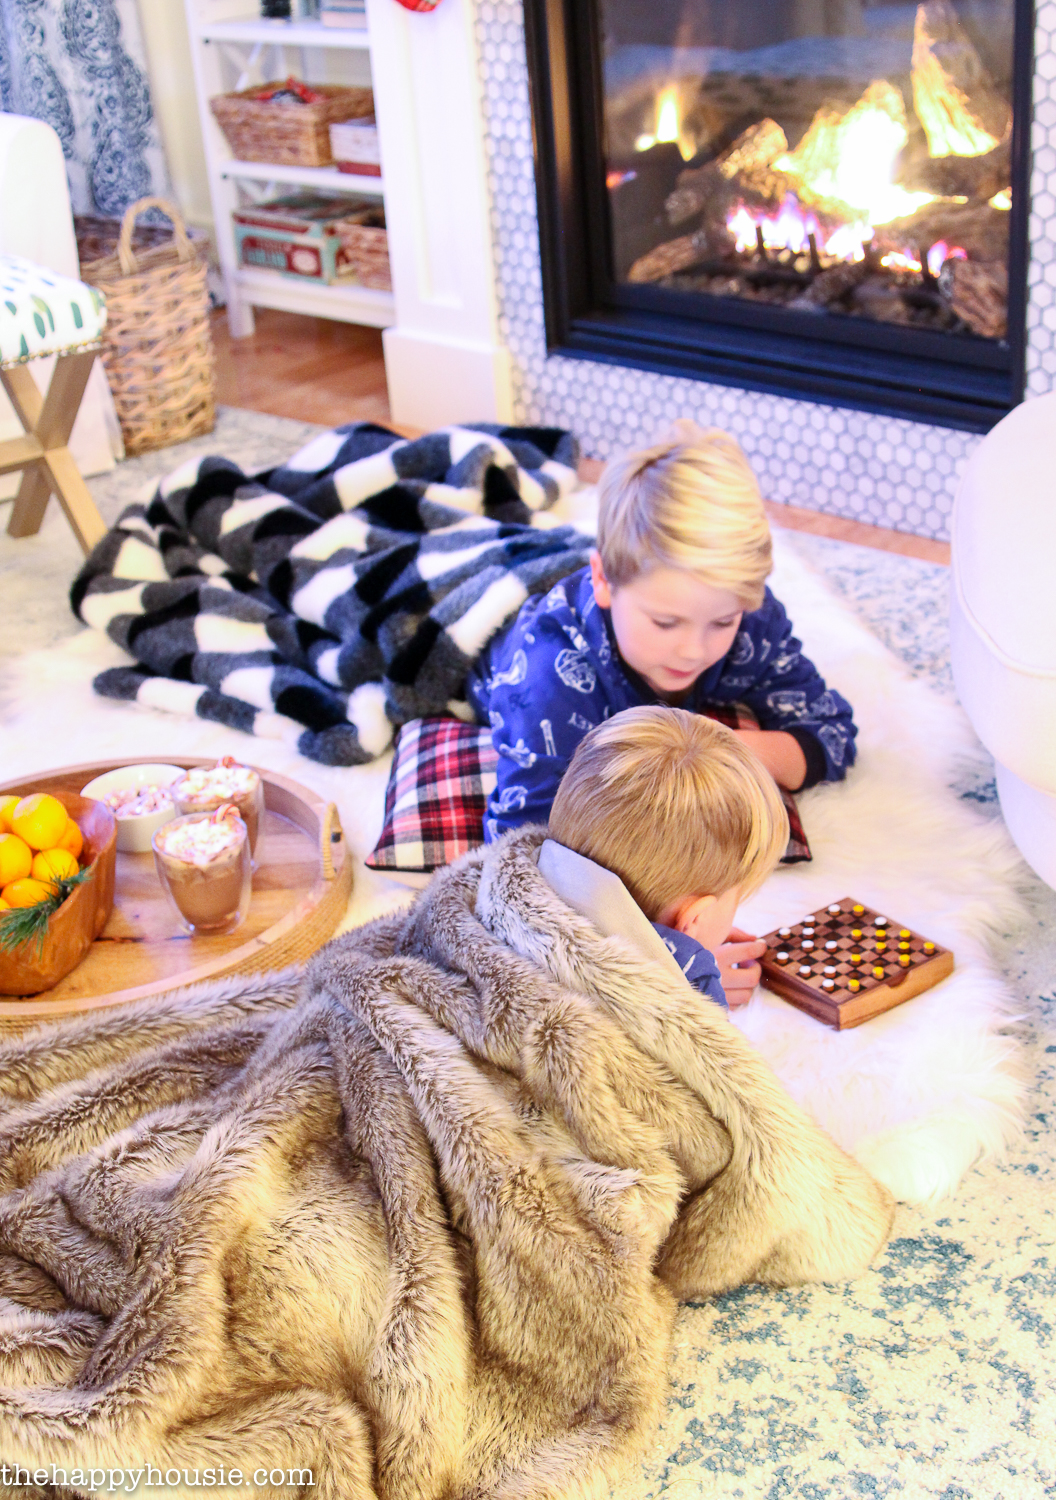 Two boys playing games in front of the fireplace.